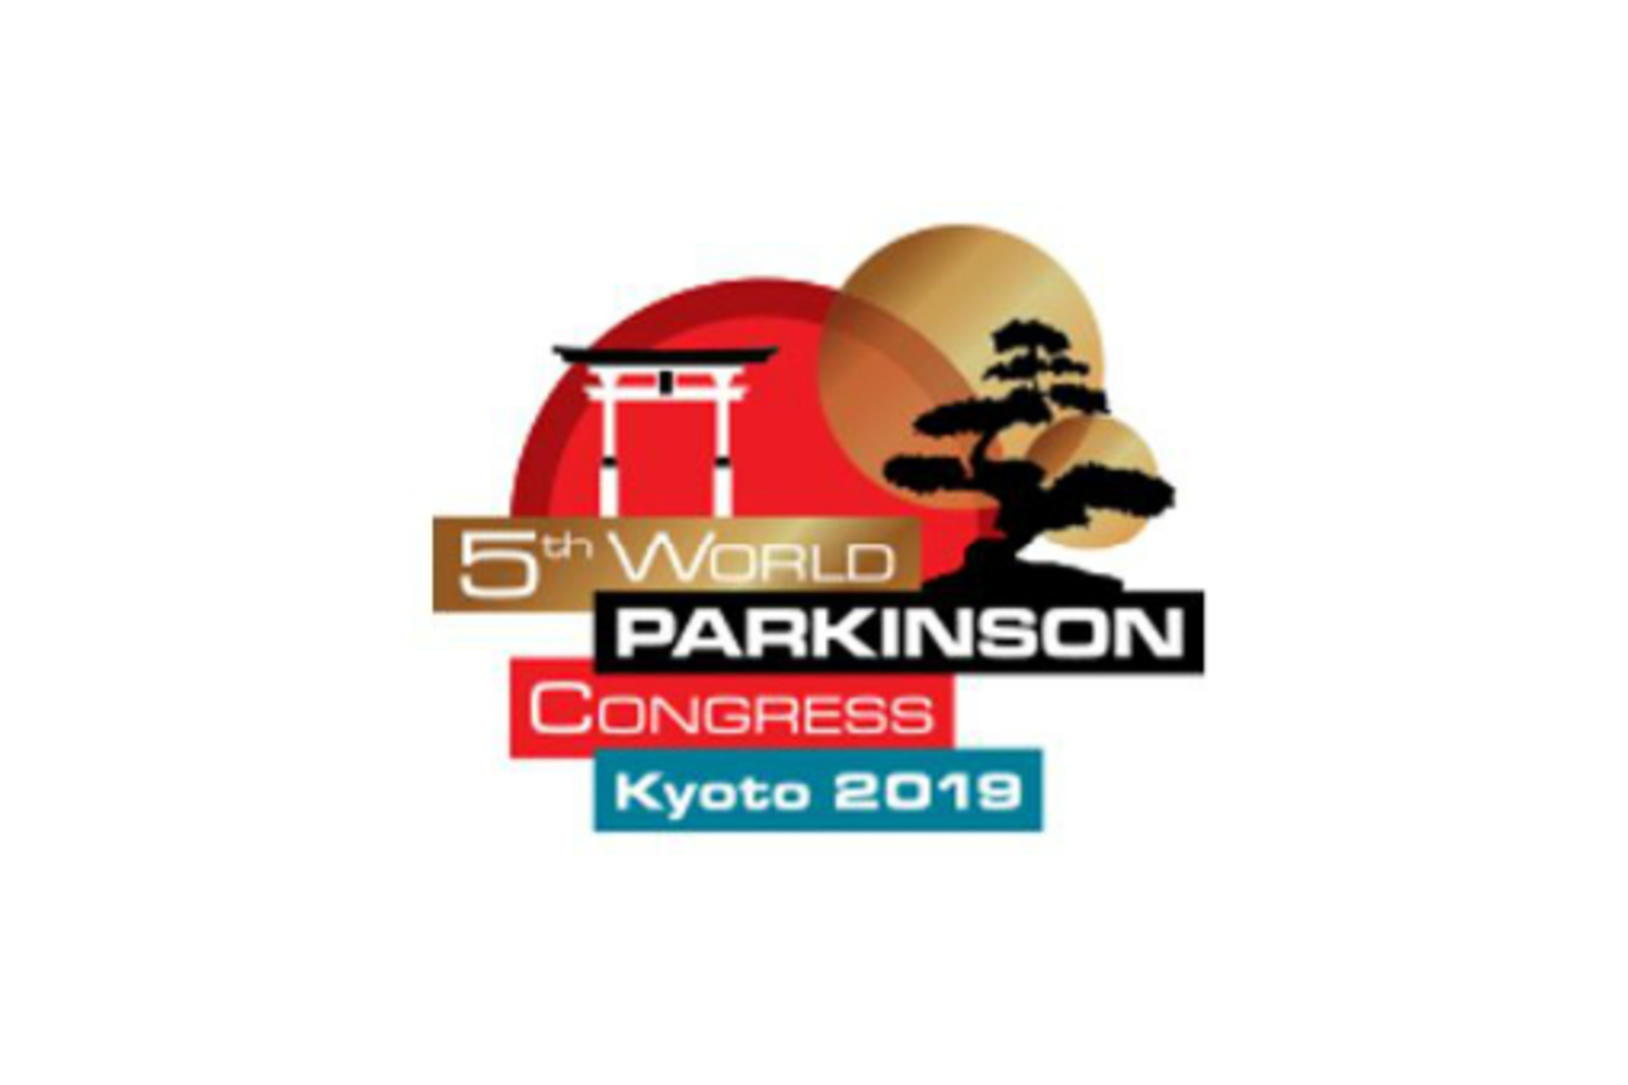 MJFF at the 2019 World Parkinson Congress, in Photos